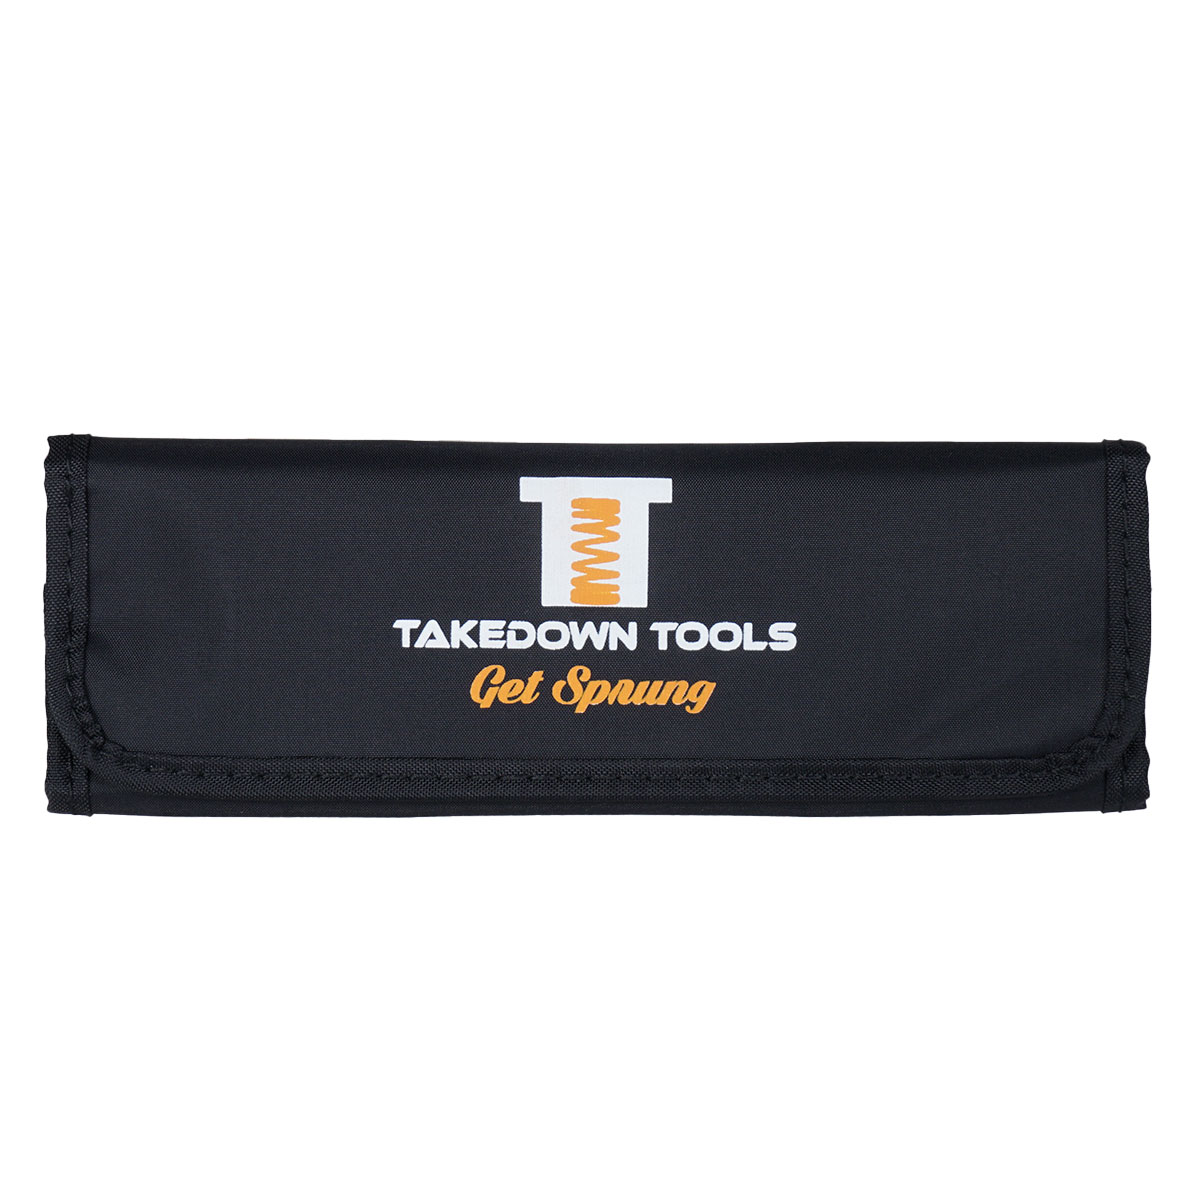 AR Takedown Tools AR-TT & Glock-Compatible Pistol Multitool, (2 Tools) with Carrying Pouch, USA Made